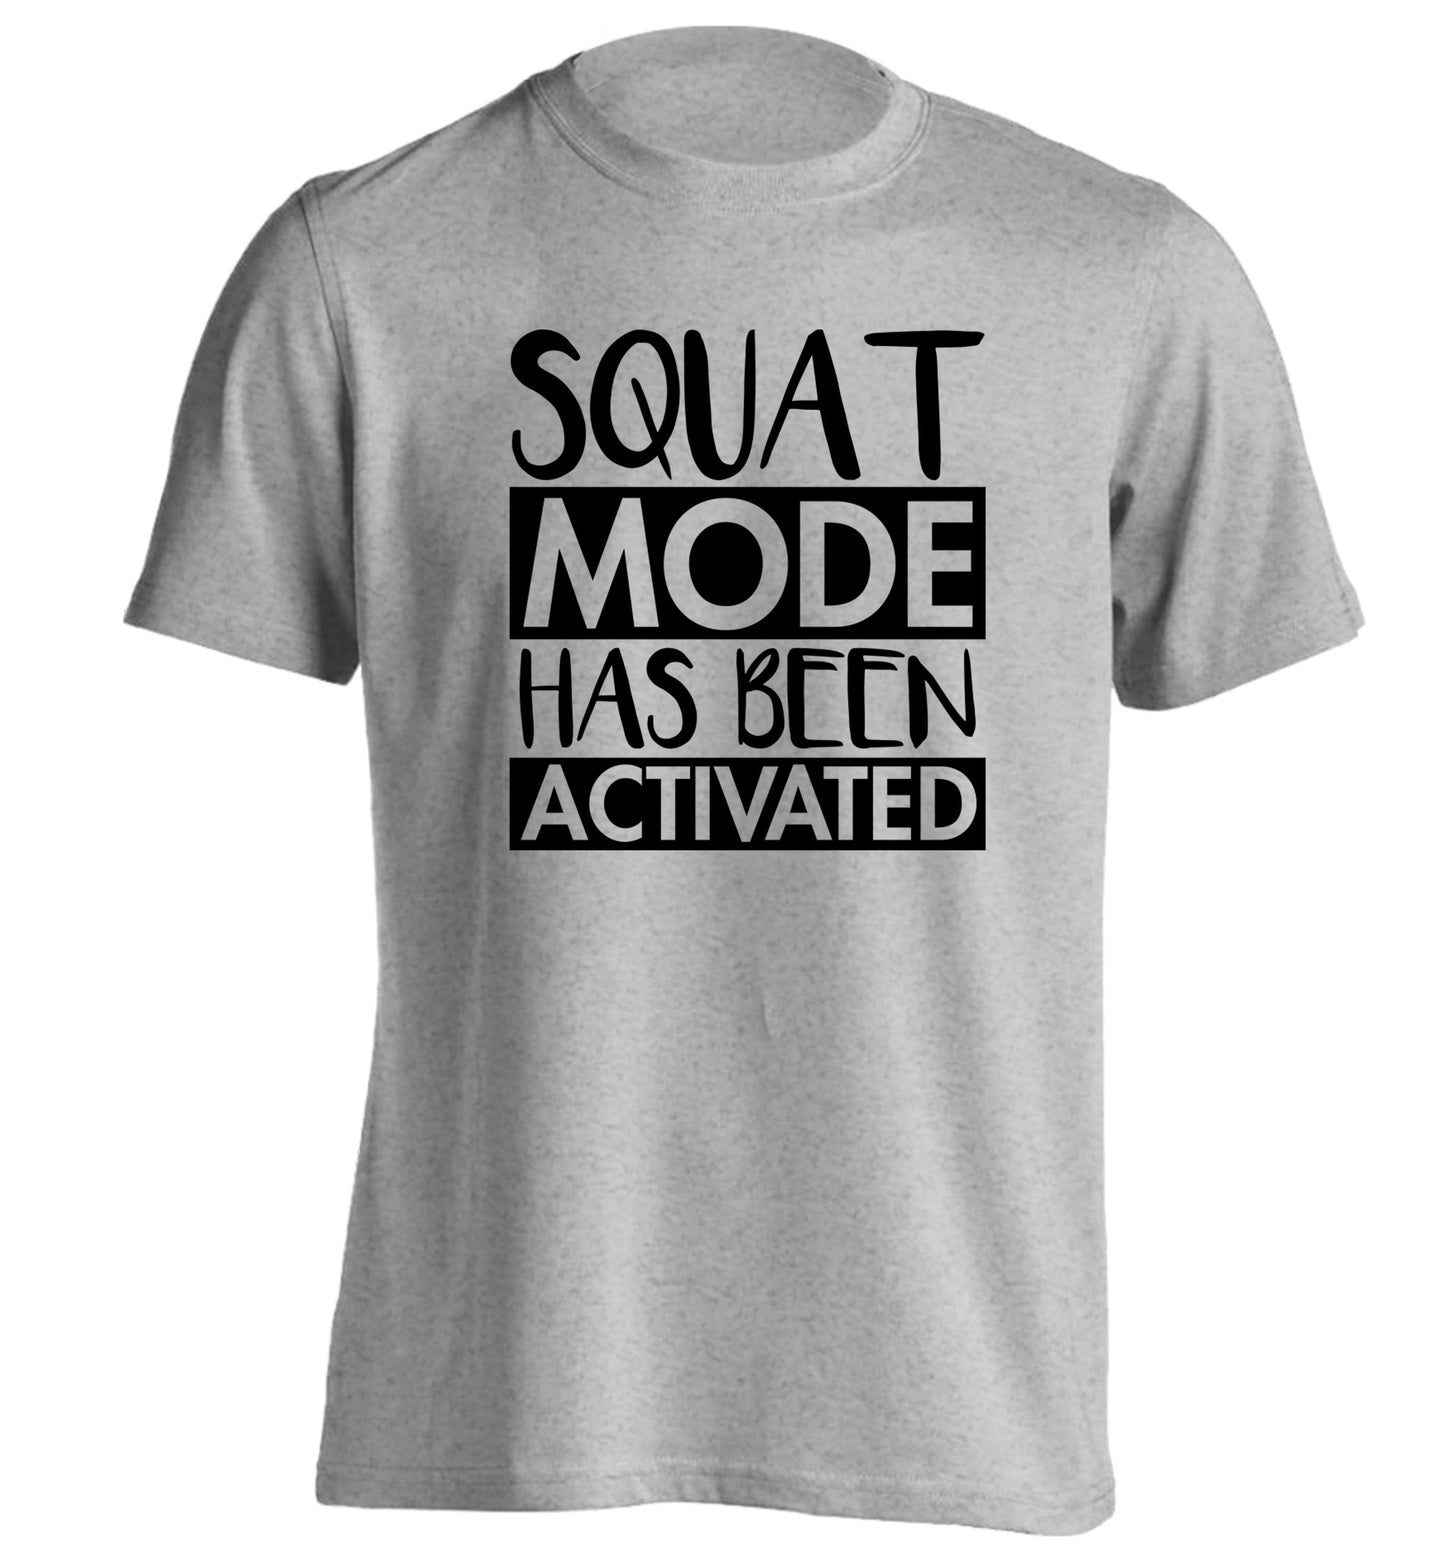 Squat mode activated adults unisex grey Tshirt 2XL